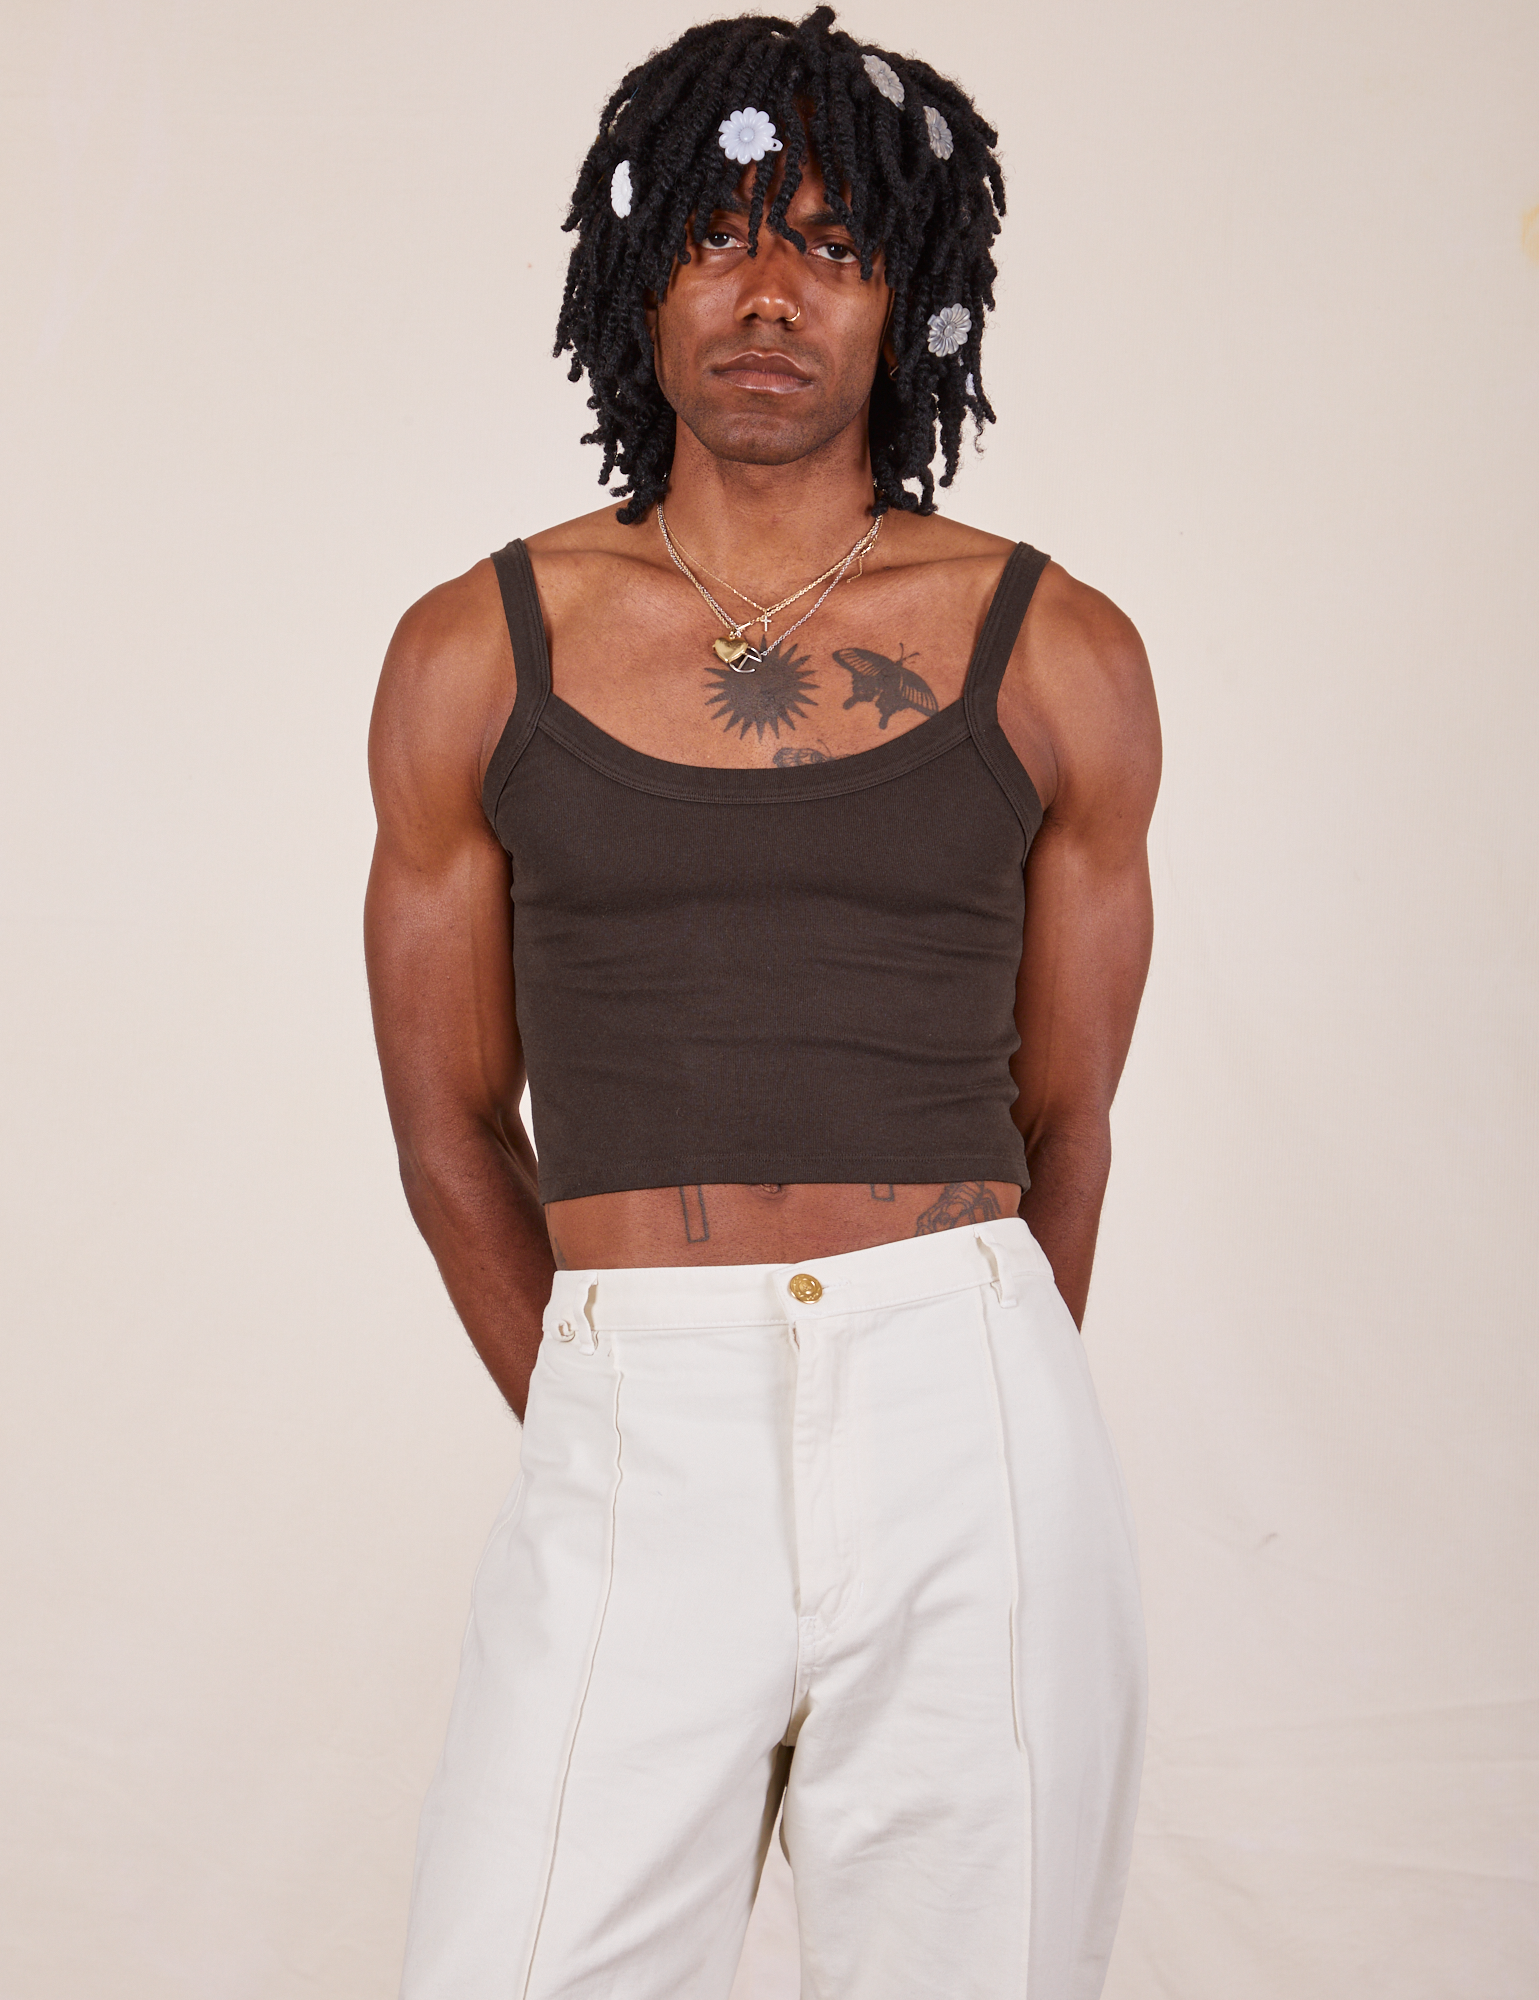 Jerrod is 6&#39;3&quot; and wearing S Cropped Cami in Espresso Brown paired with vintage off-white Western Pants